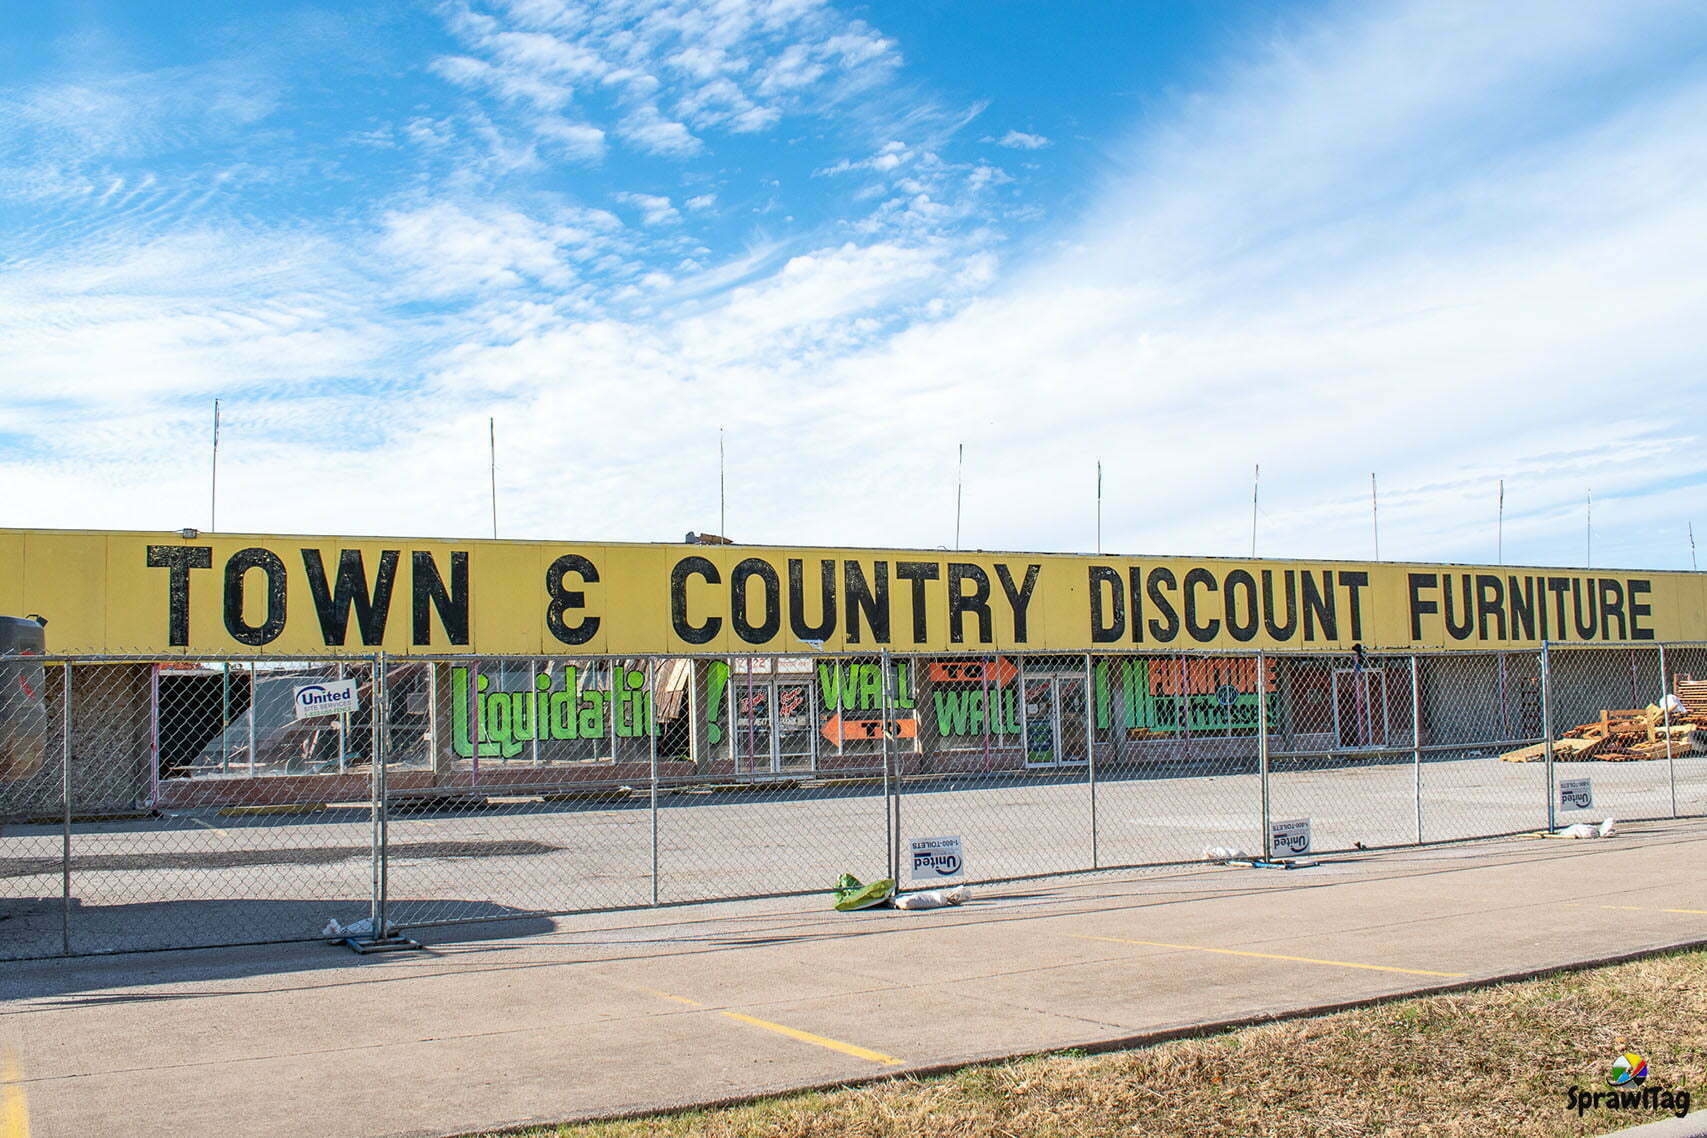 Closed Town & Country Furniture Store: Grand Prairie ...